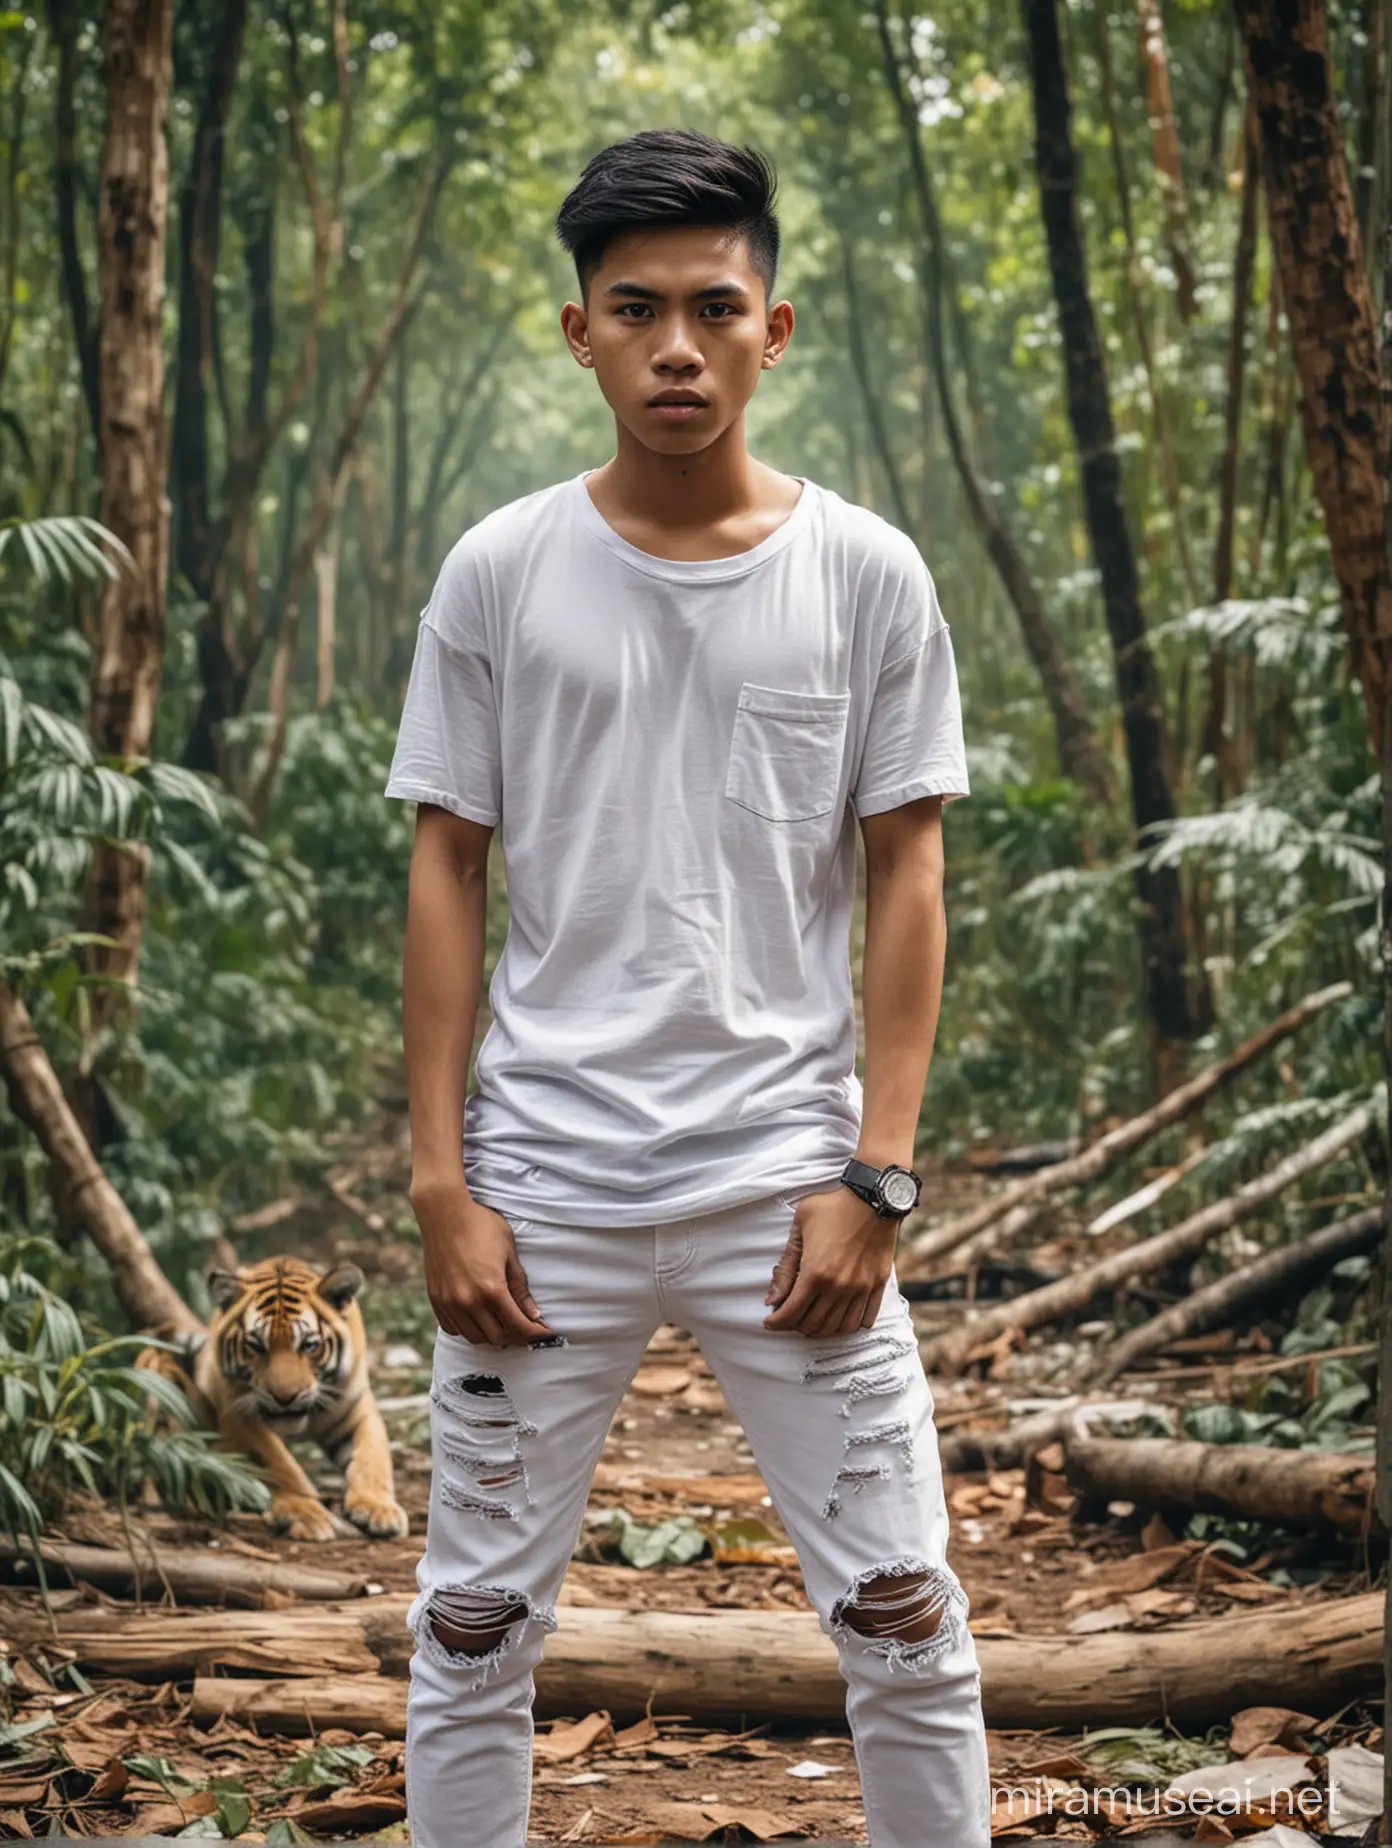 Courageous Indonesian Teenager Defending Against Tiger Attack in Enchanted Forest